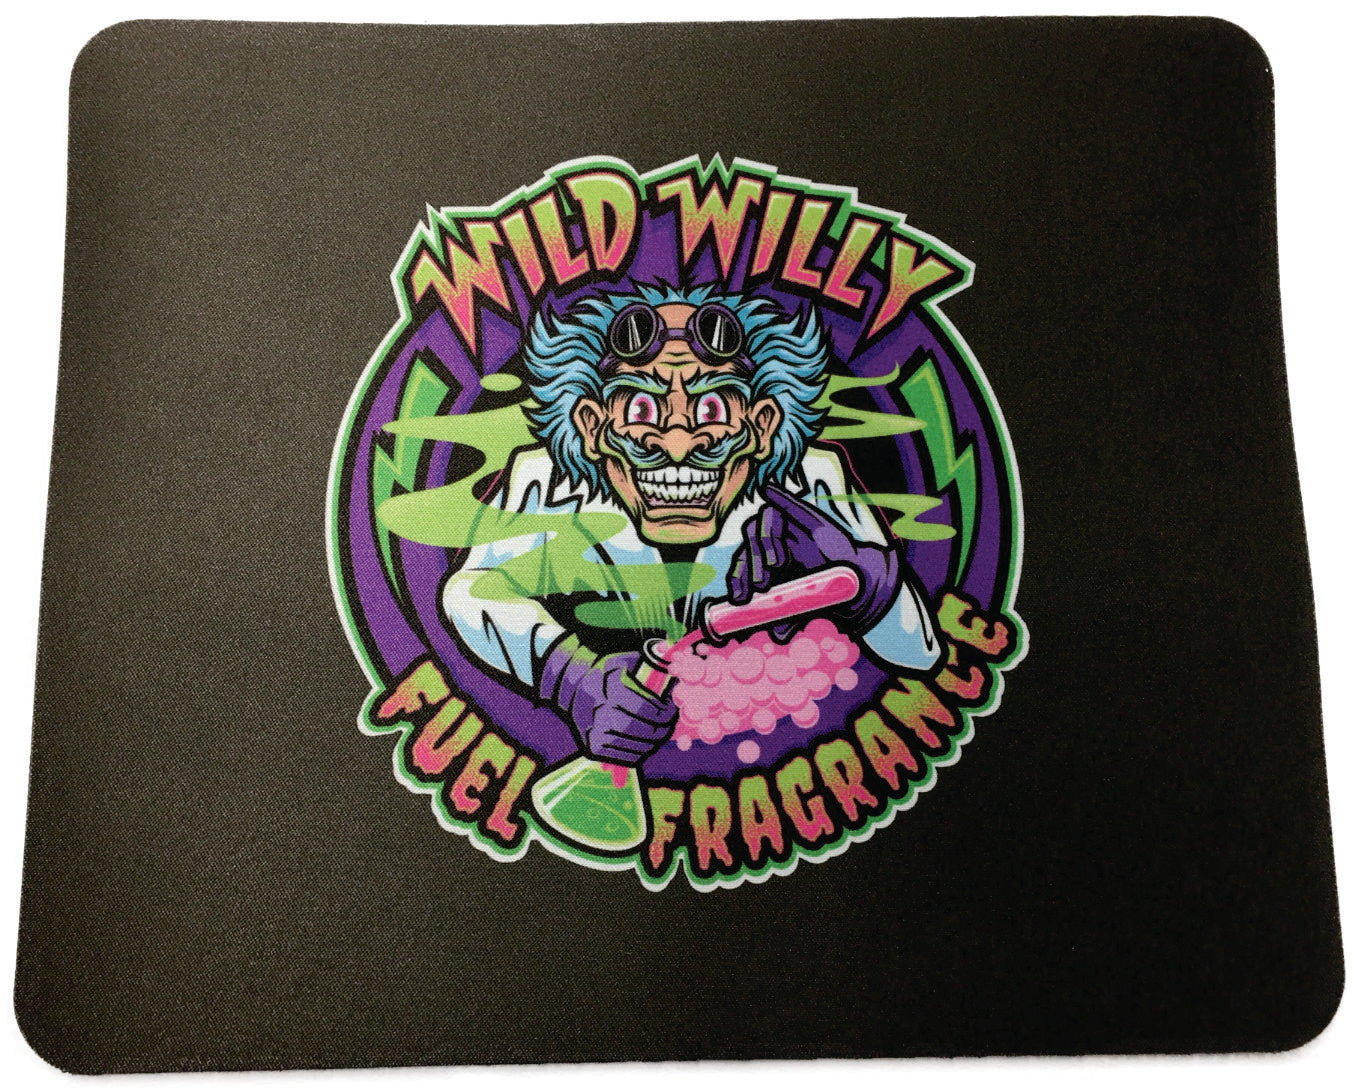 Wild Willy Fuel Mouse Pad